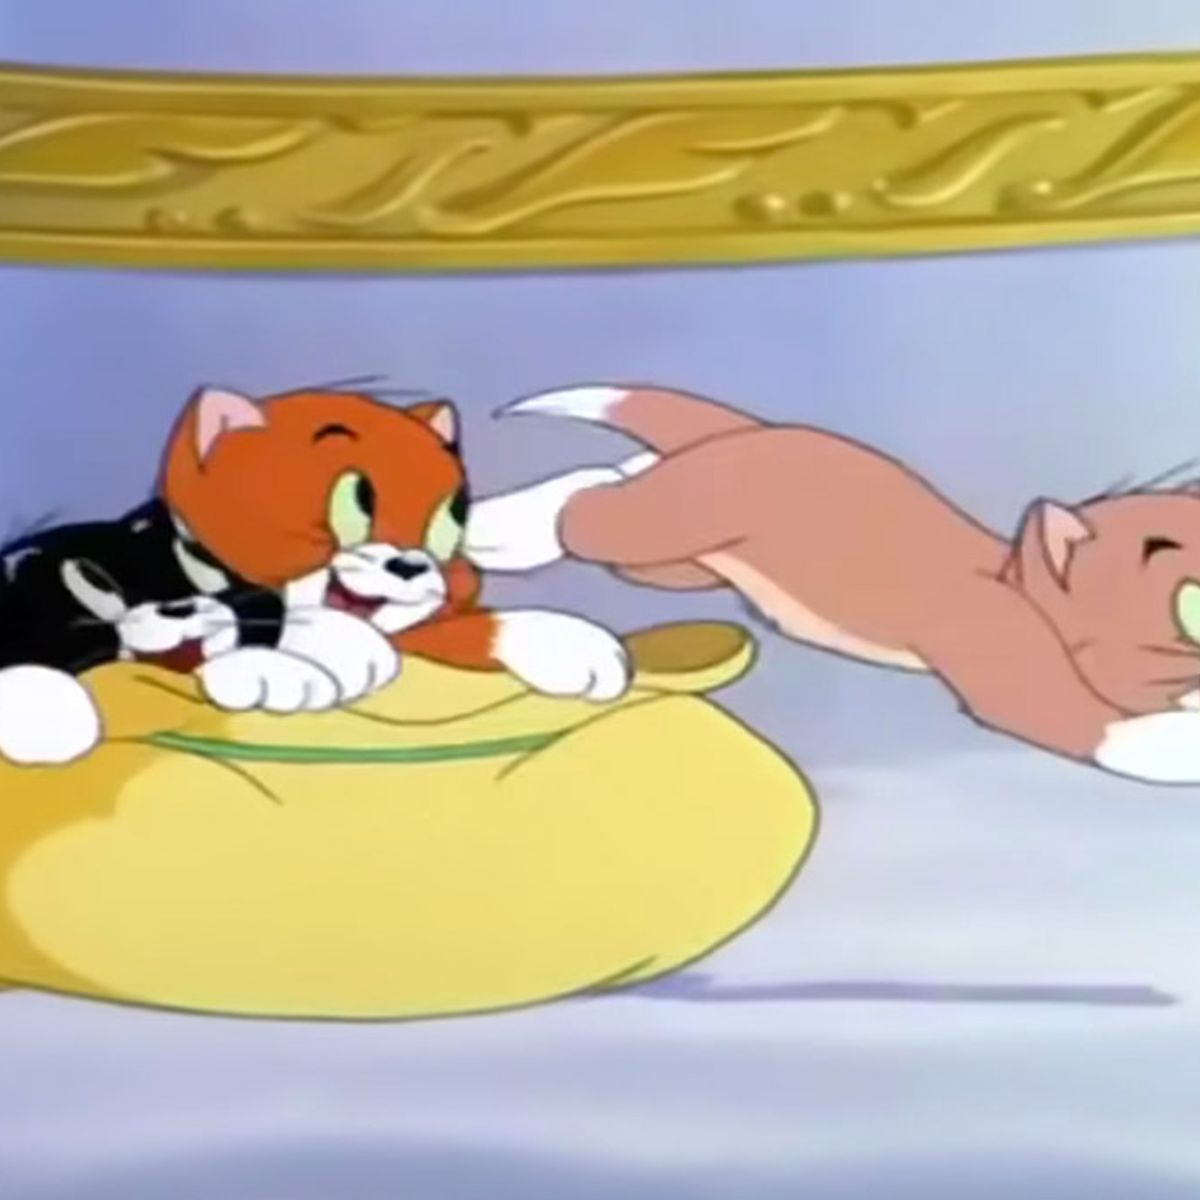 Did a 'Tom and Jerry' Cartoon Show Dead, Drowned Kittens? | Snopes.com